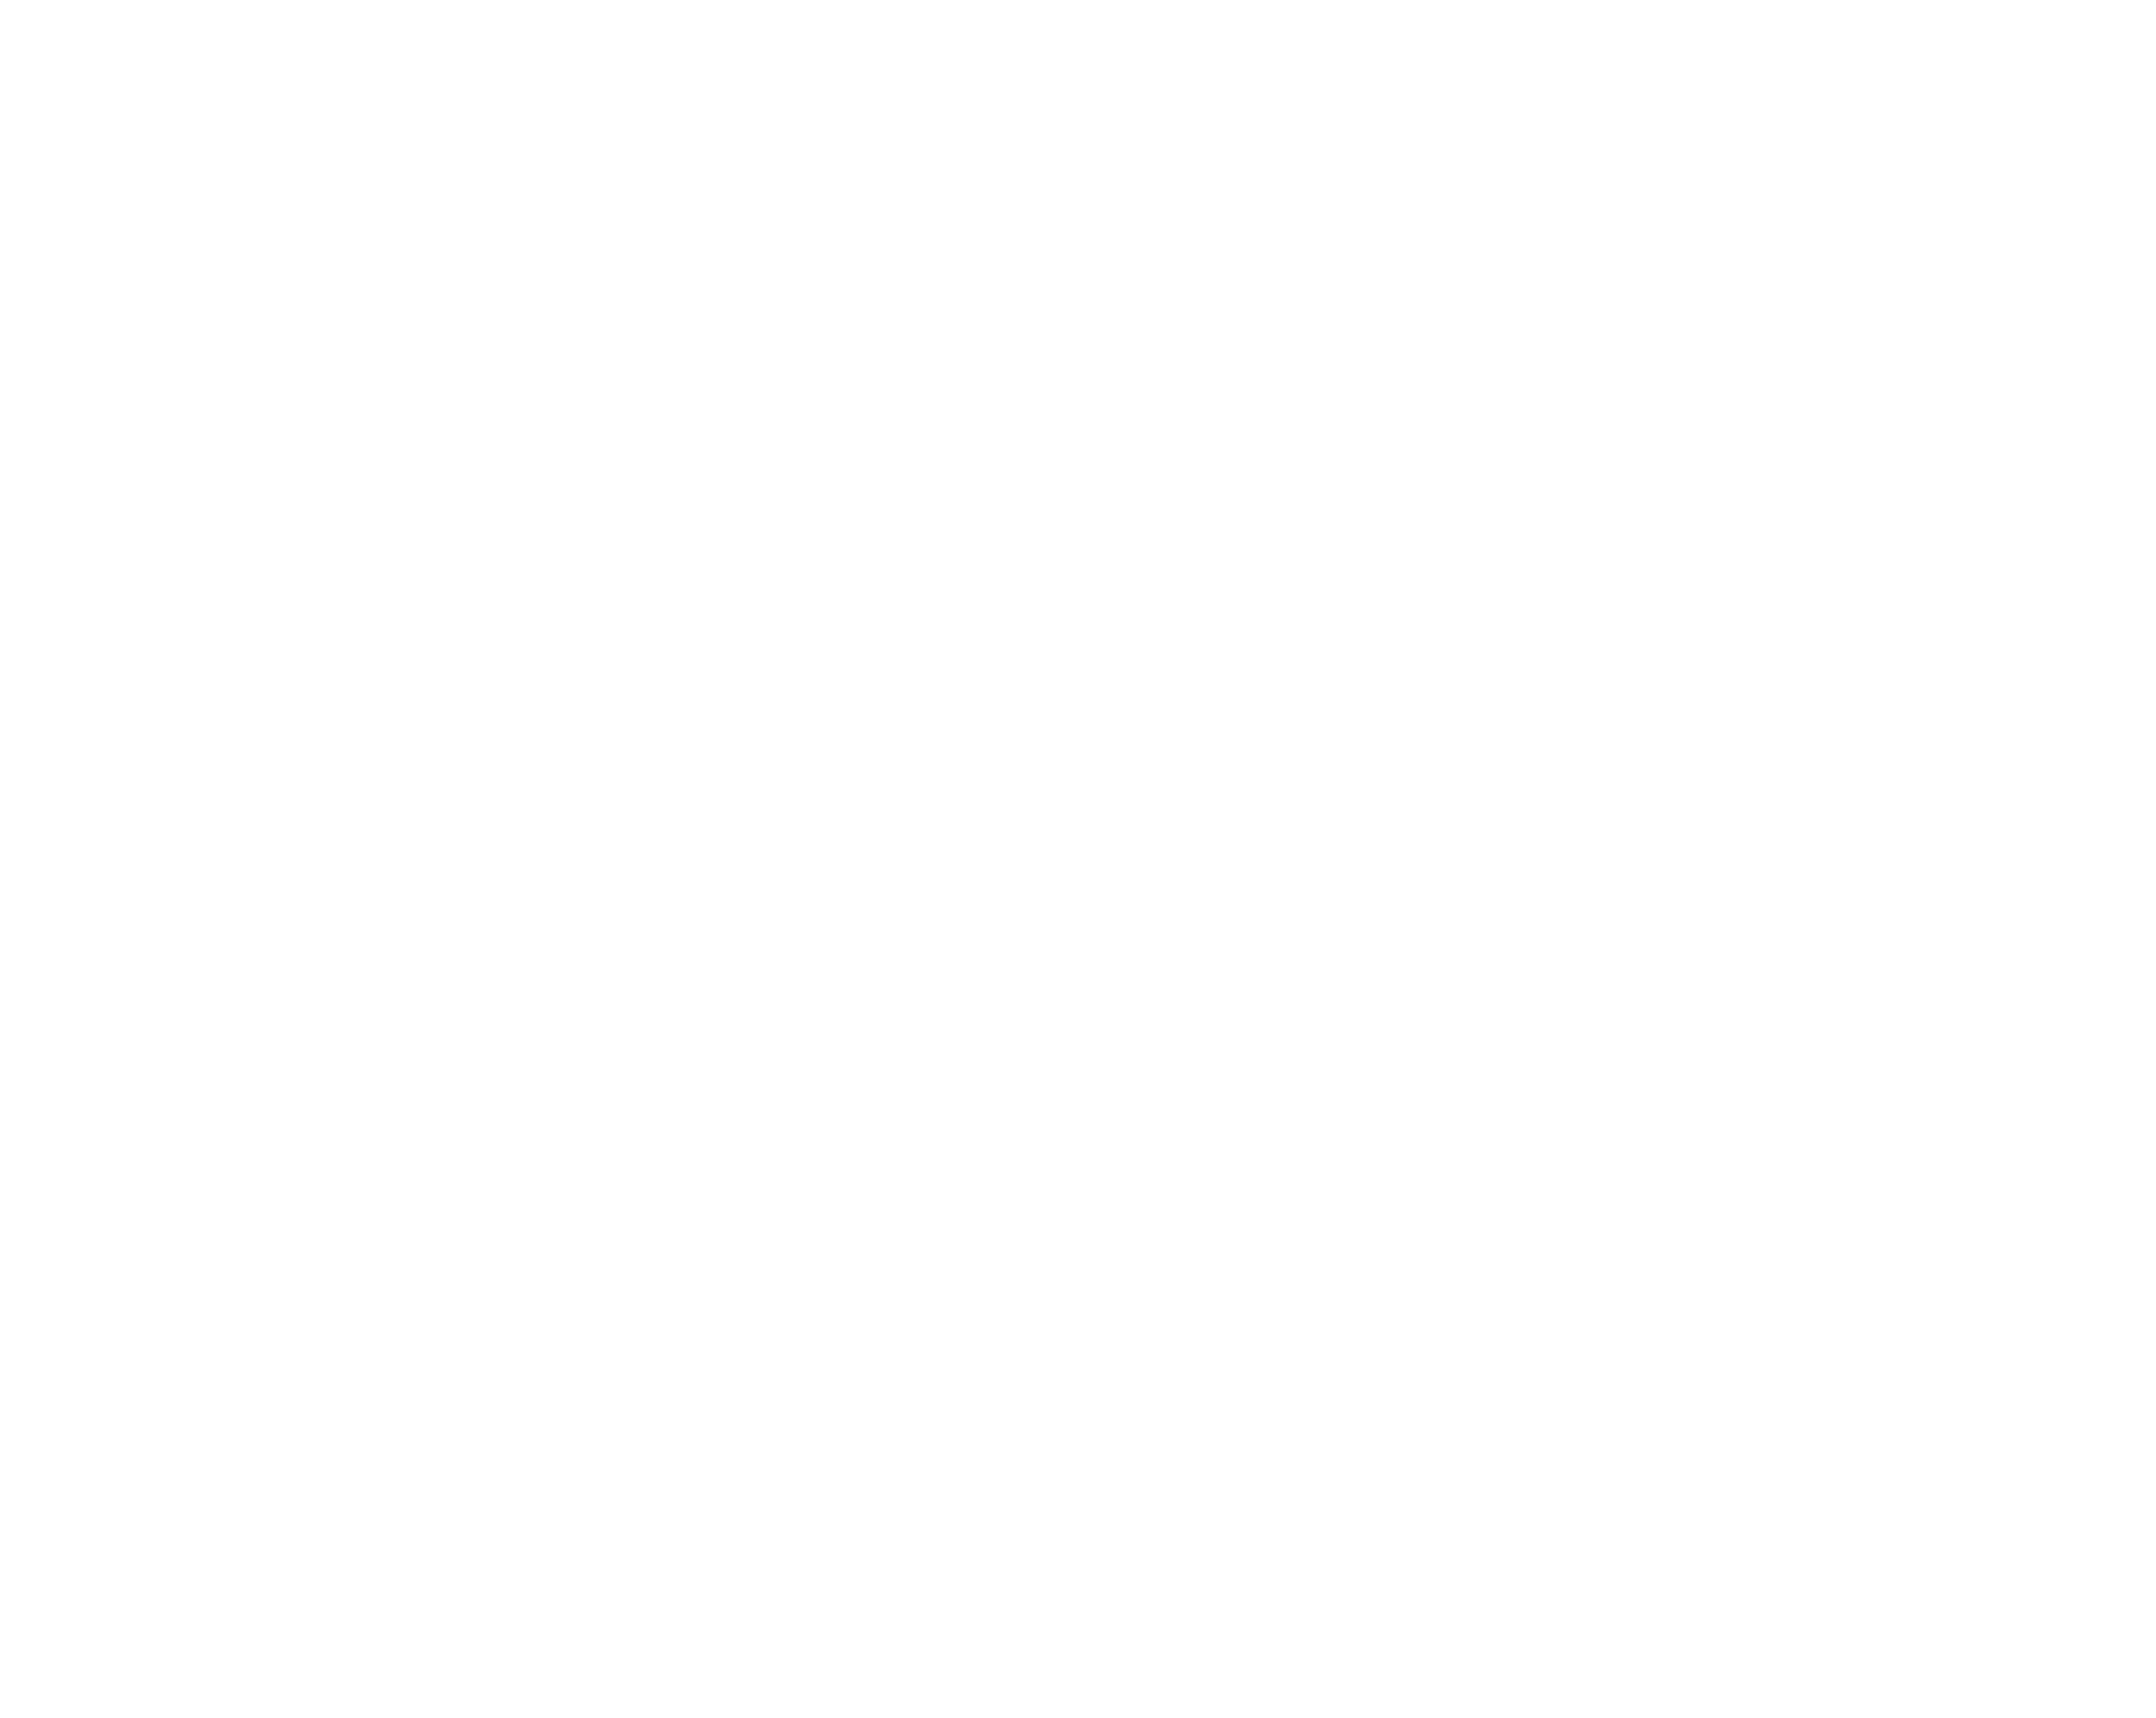 Welcome to the Cider Gardens